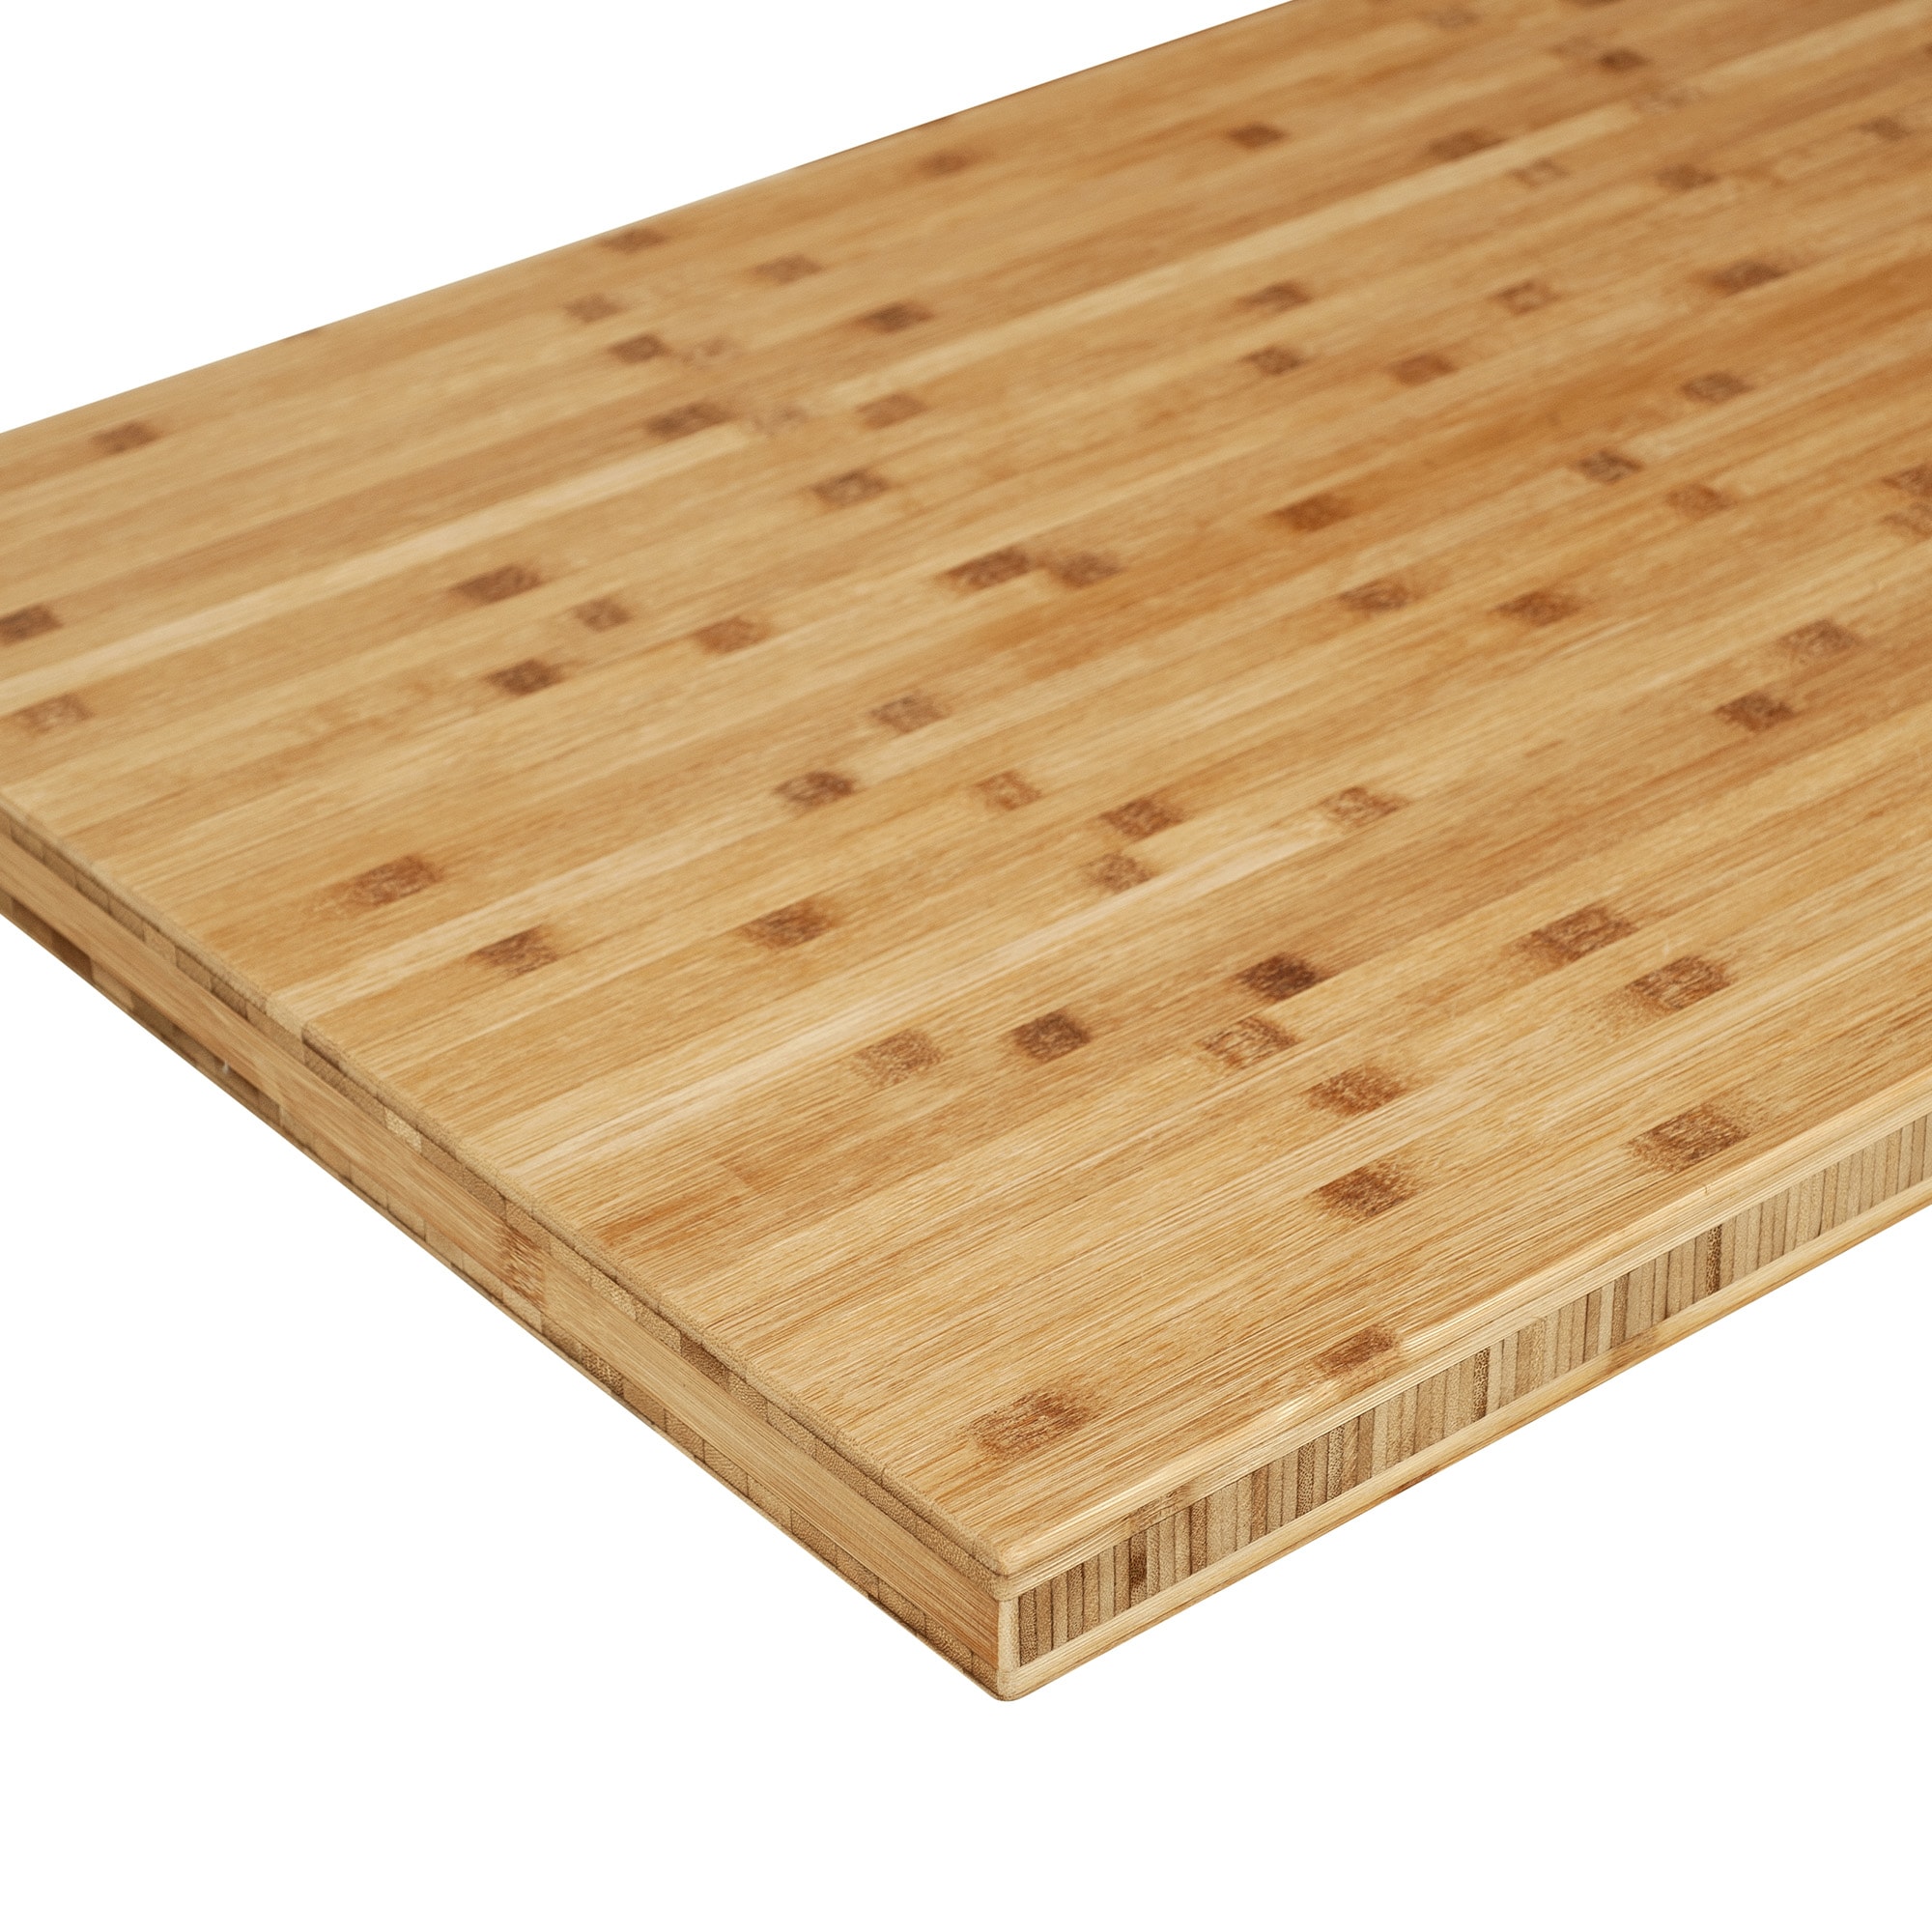 Sparrow Peak Horizontal Grain 72-in x 25-in x 1.75-in Unfinished Natural  Straight Butcher Block Bamboo Countertop